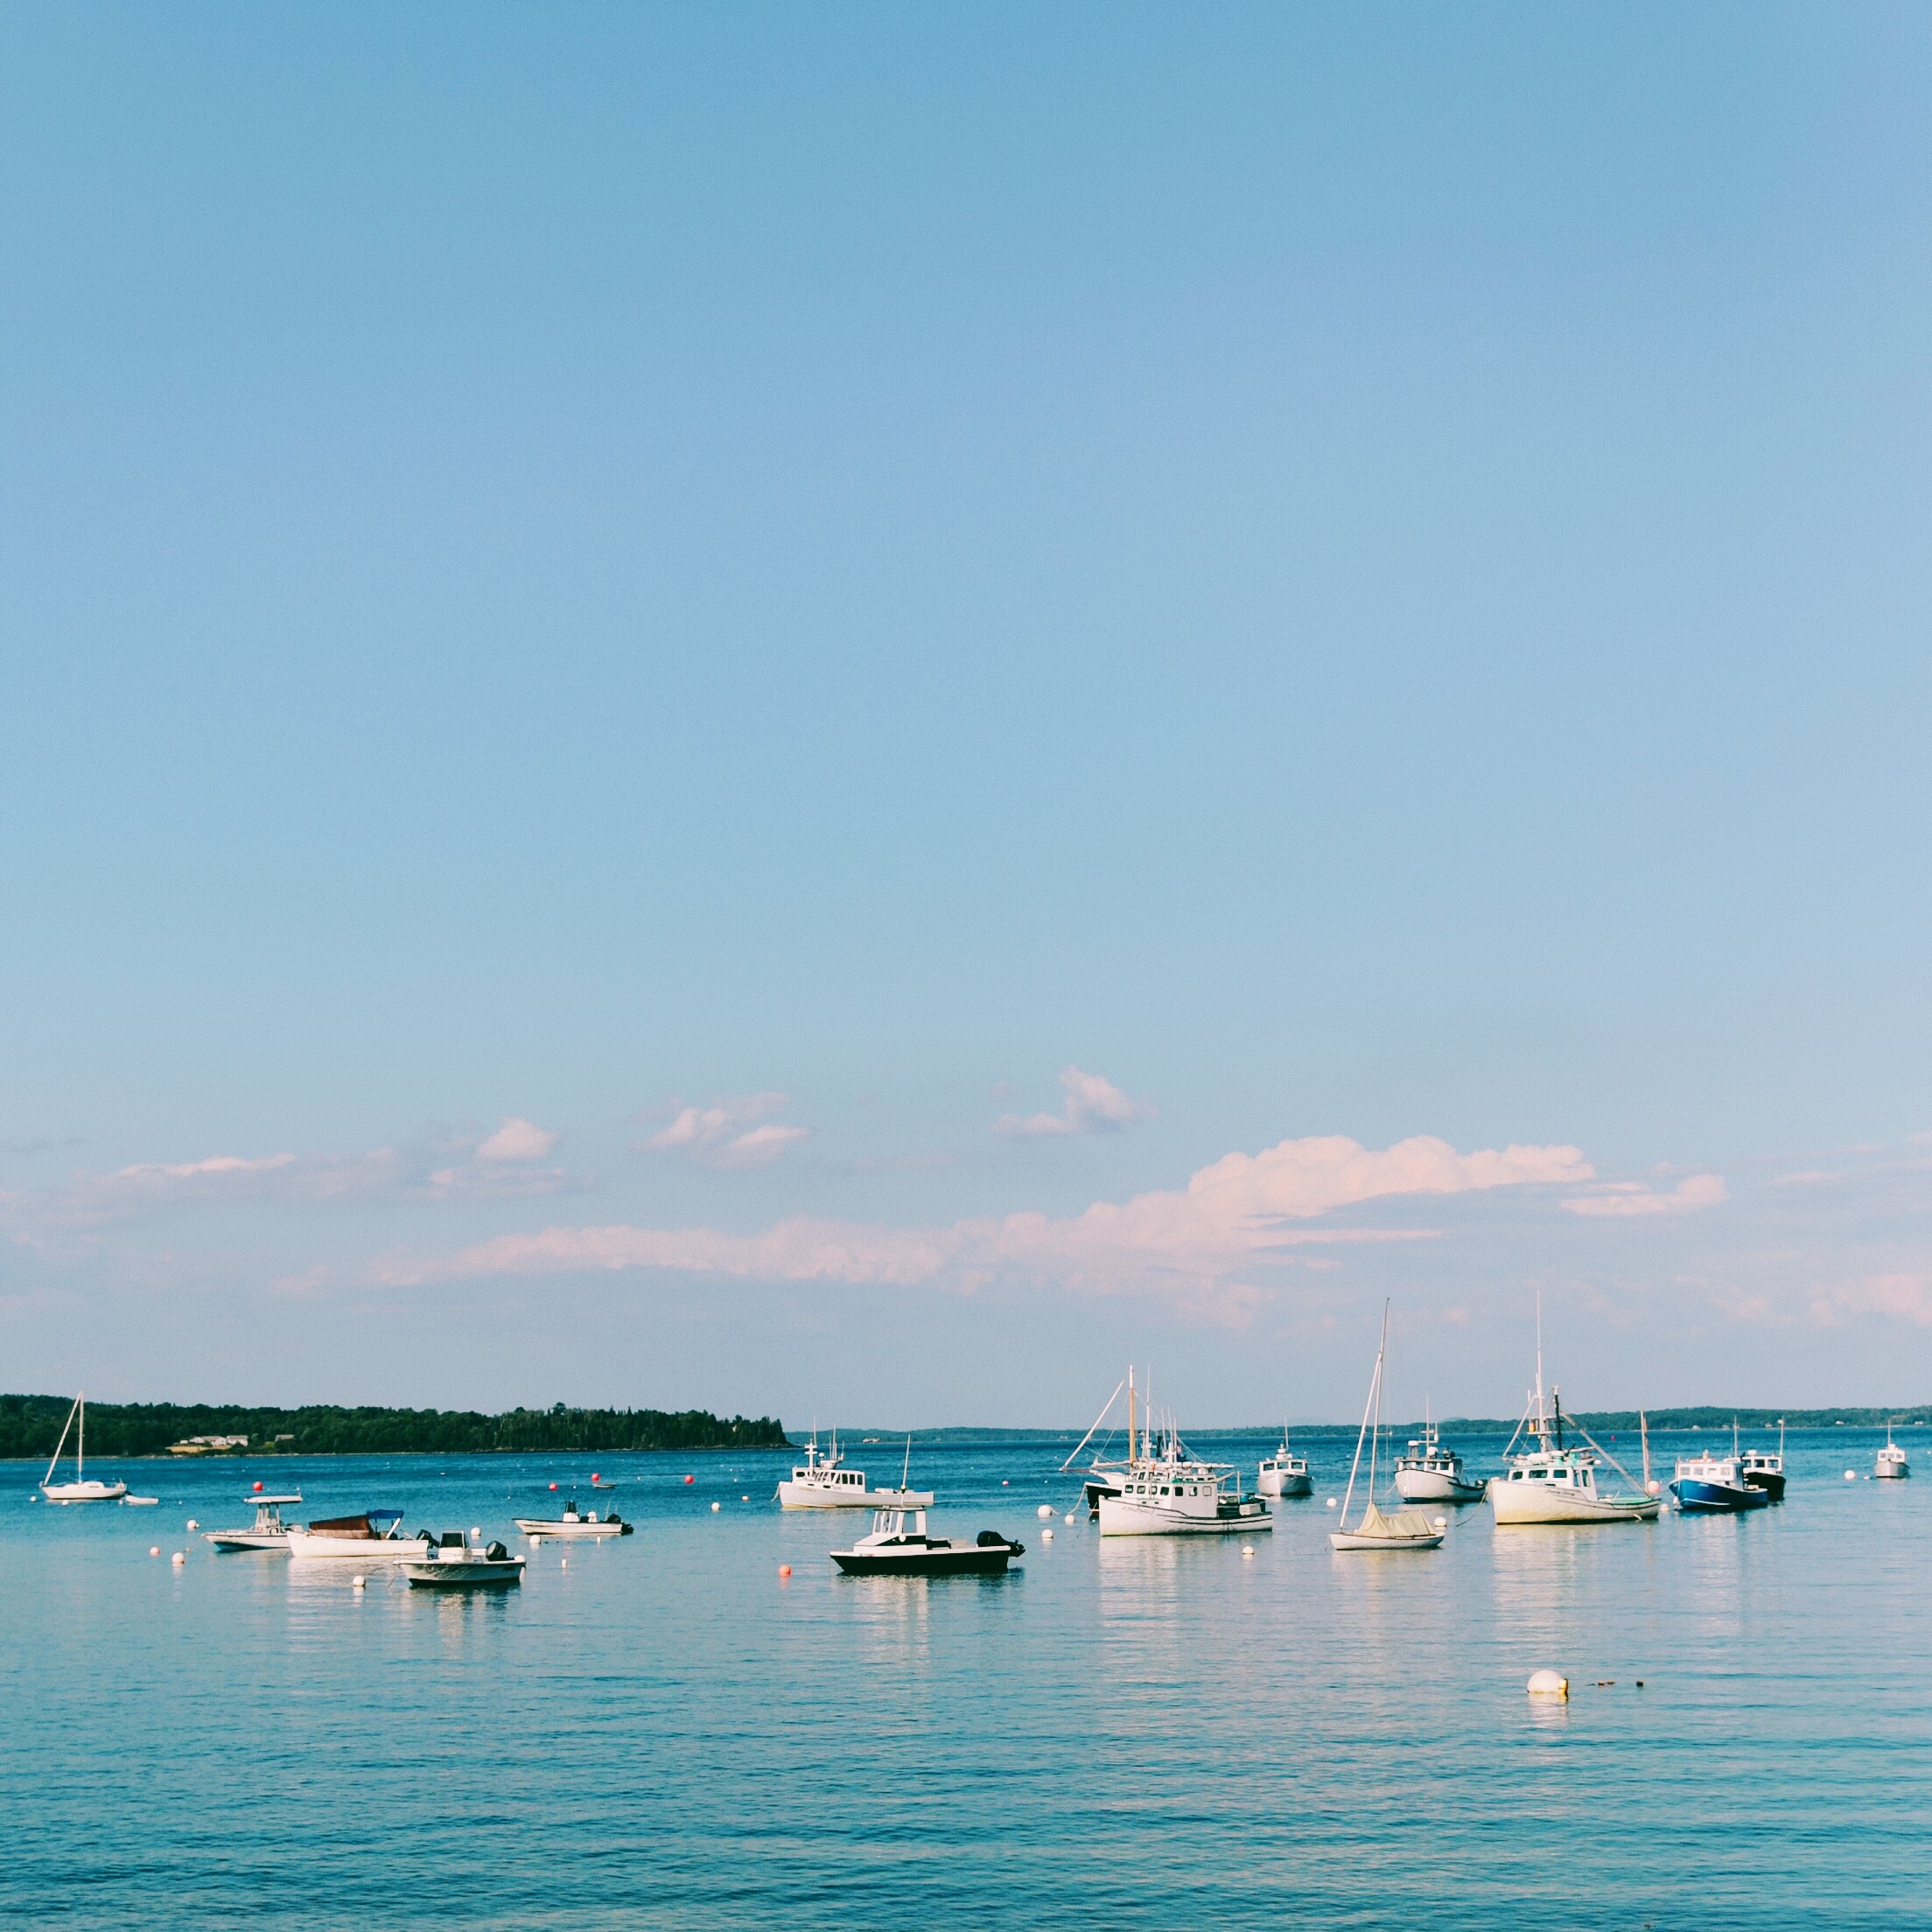 Best Places to Stay in Maine | Best Hotels on the Coast of Maine | Travel Guide to the coast of Maine | How to Experience Maine | Camden, Rockport, Rockland, Portland, Kennebunkport, Maine | Best of Maine via Travel Blogger @elanaloo + elanaloo.com